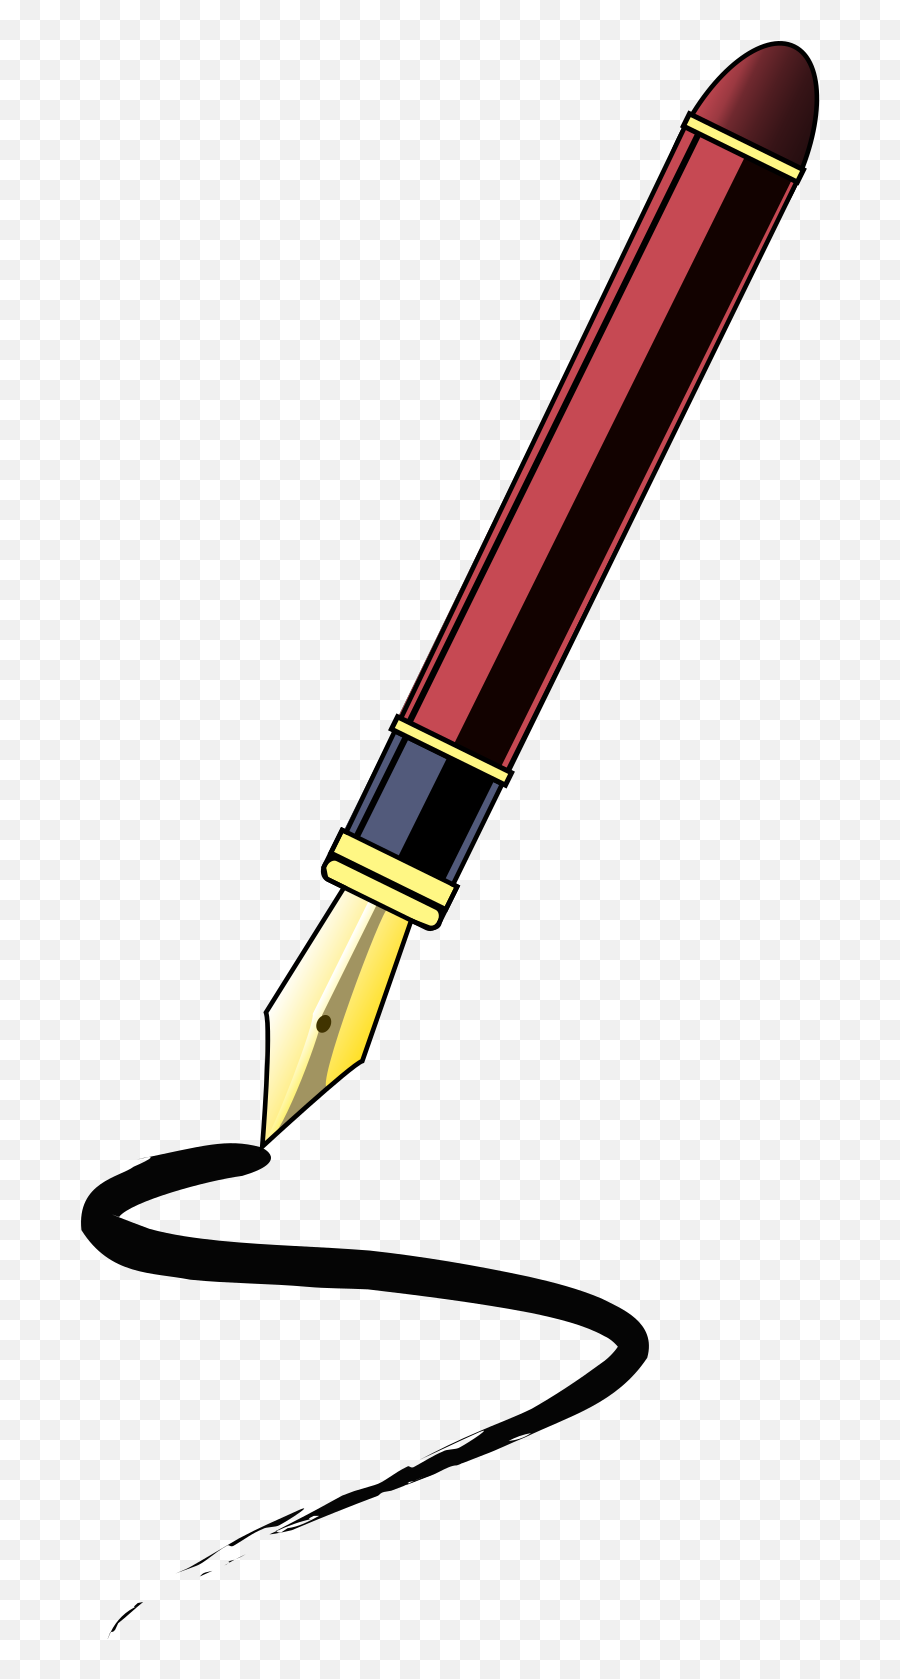 Ink Pen Clipart - Png Download Full Size Clipart 5384899 Pen Clip Art,Ink Icon